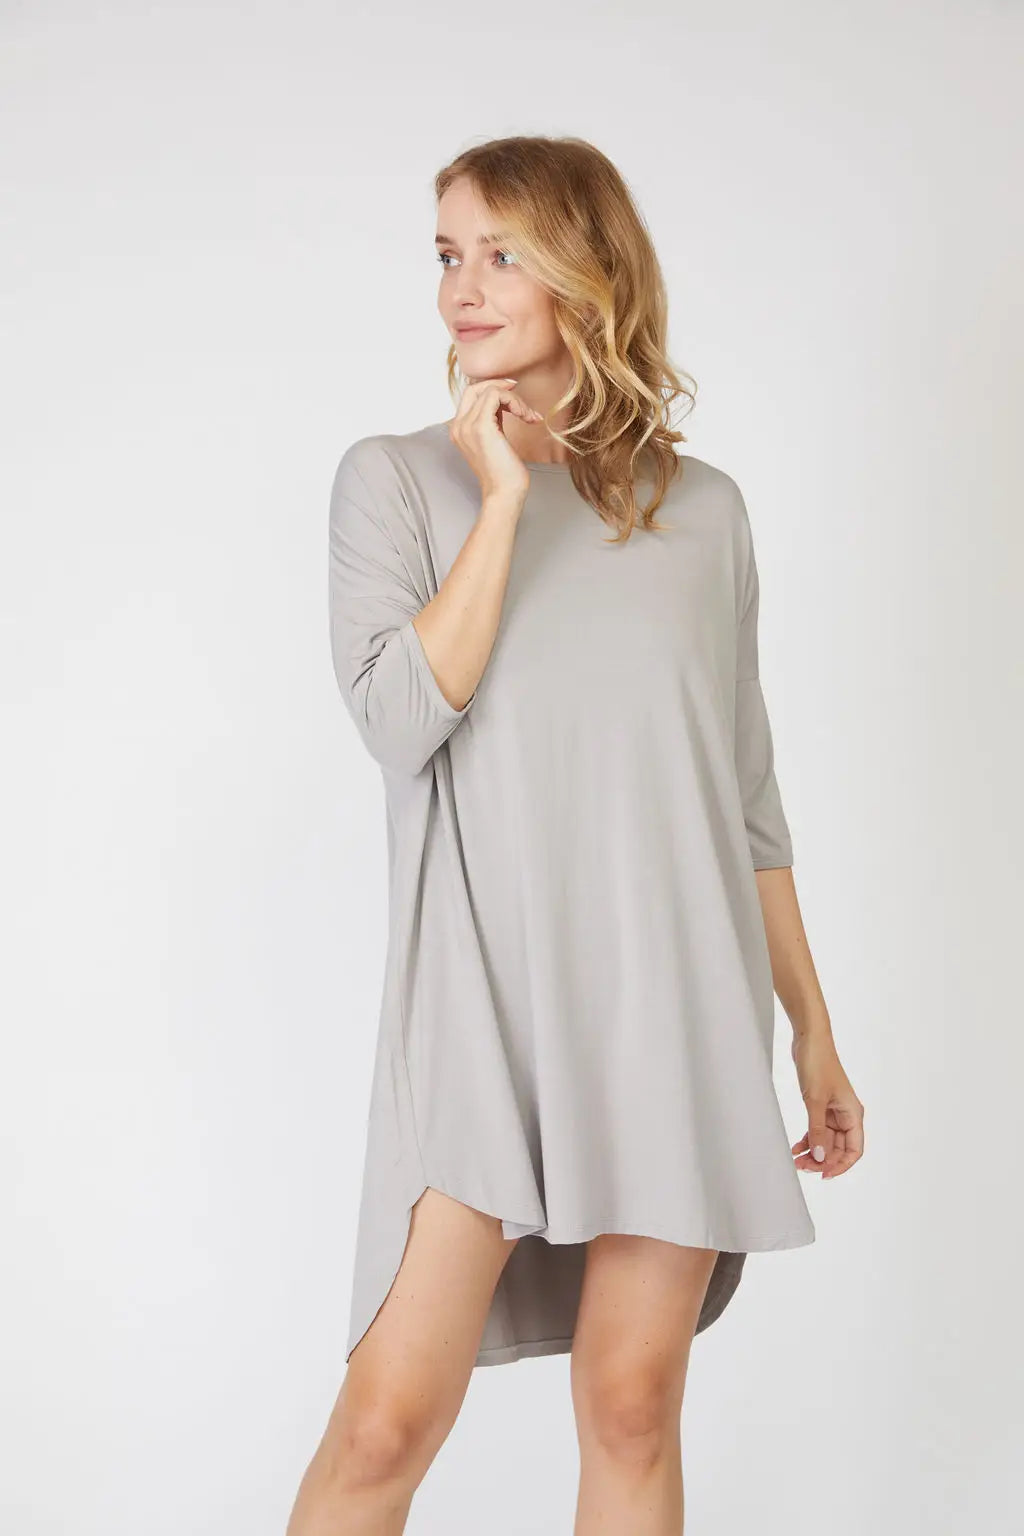 Bamboo 3/4 Sleeve Nightshirt Lounge Wear Uni-T Shop by Style